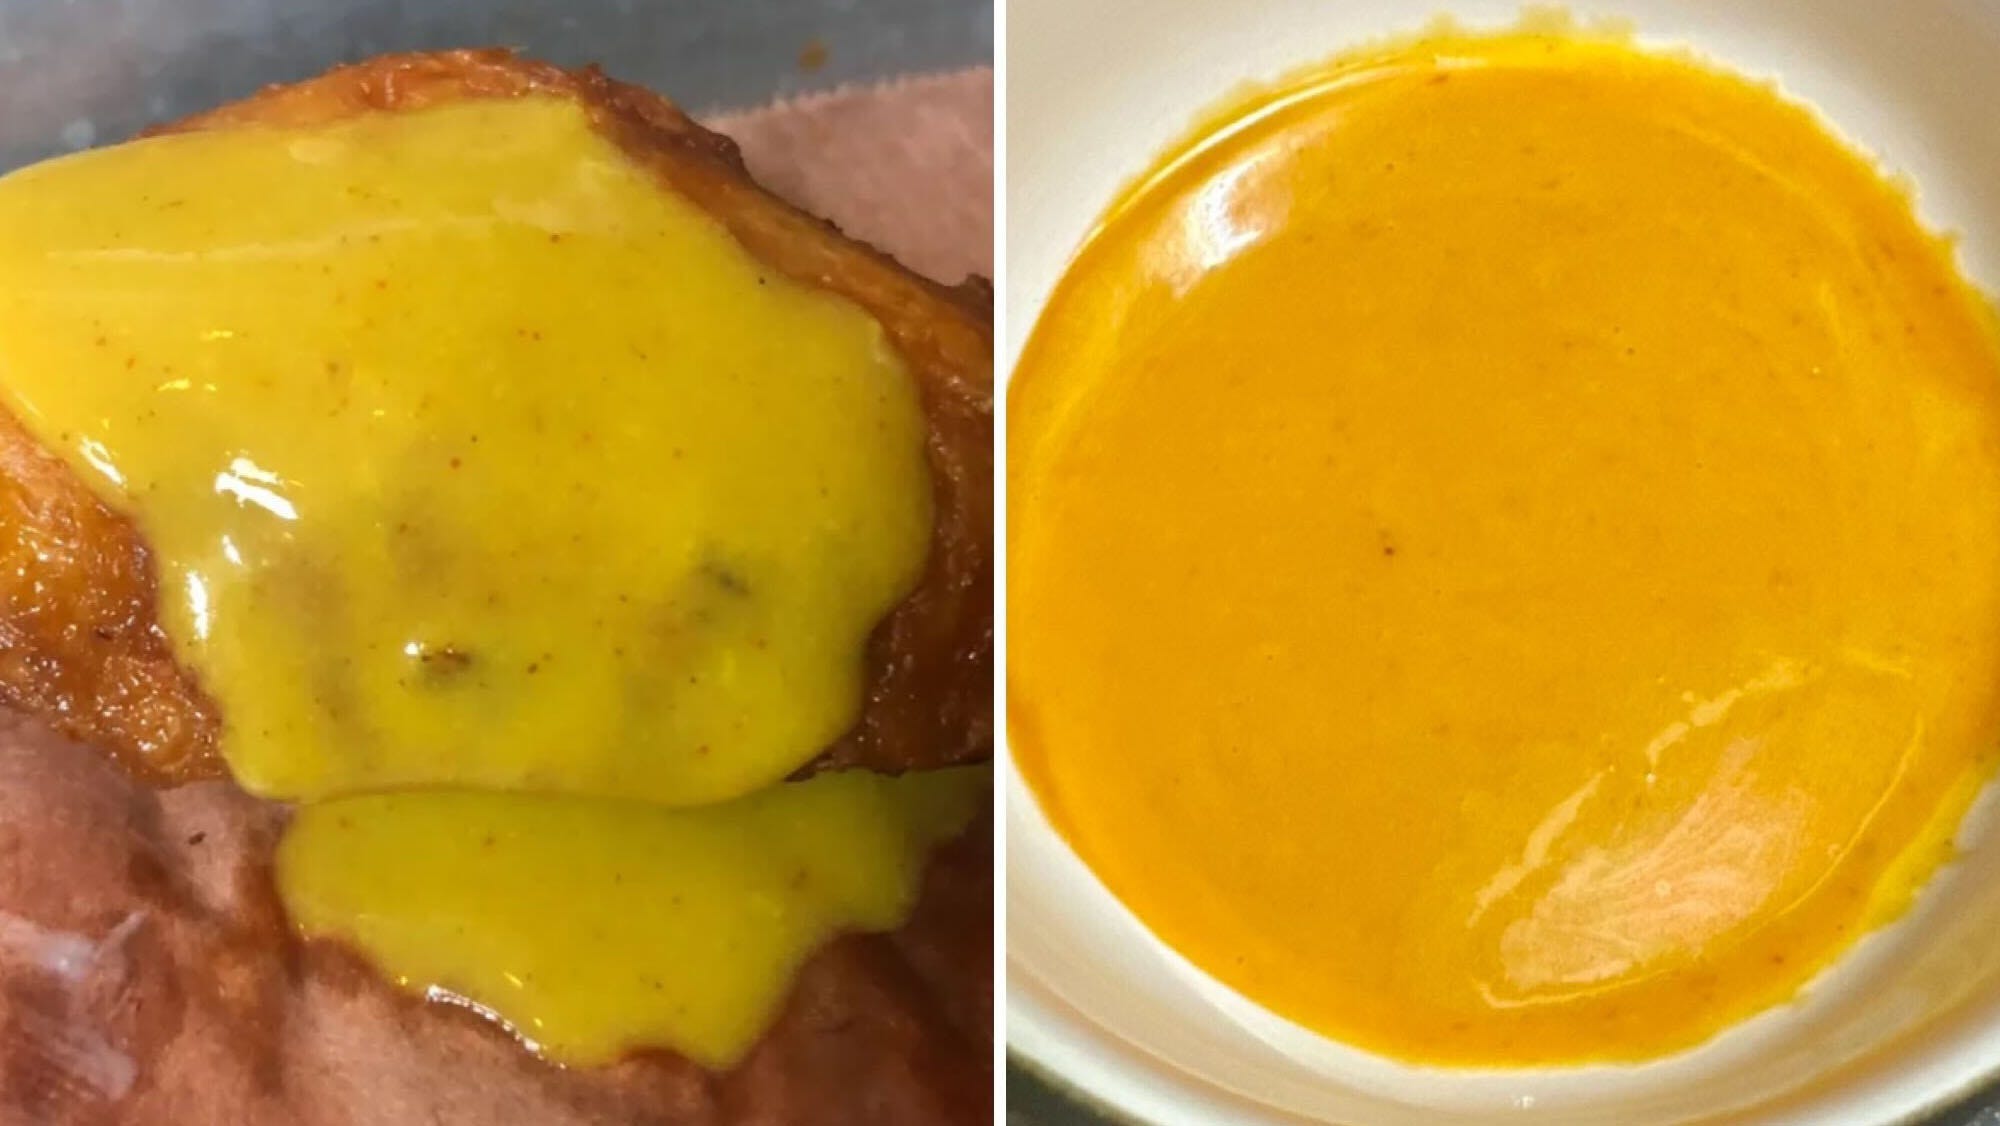 Sunny South Carolina sauce brightens barbecue with golden blaze of mustard